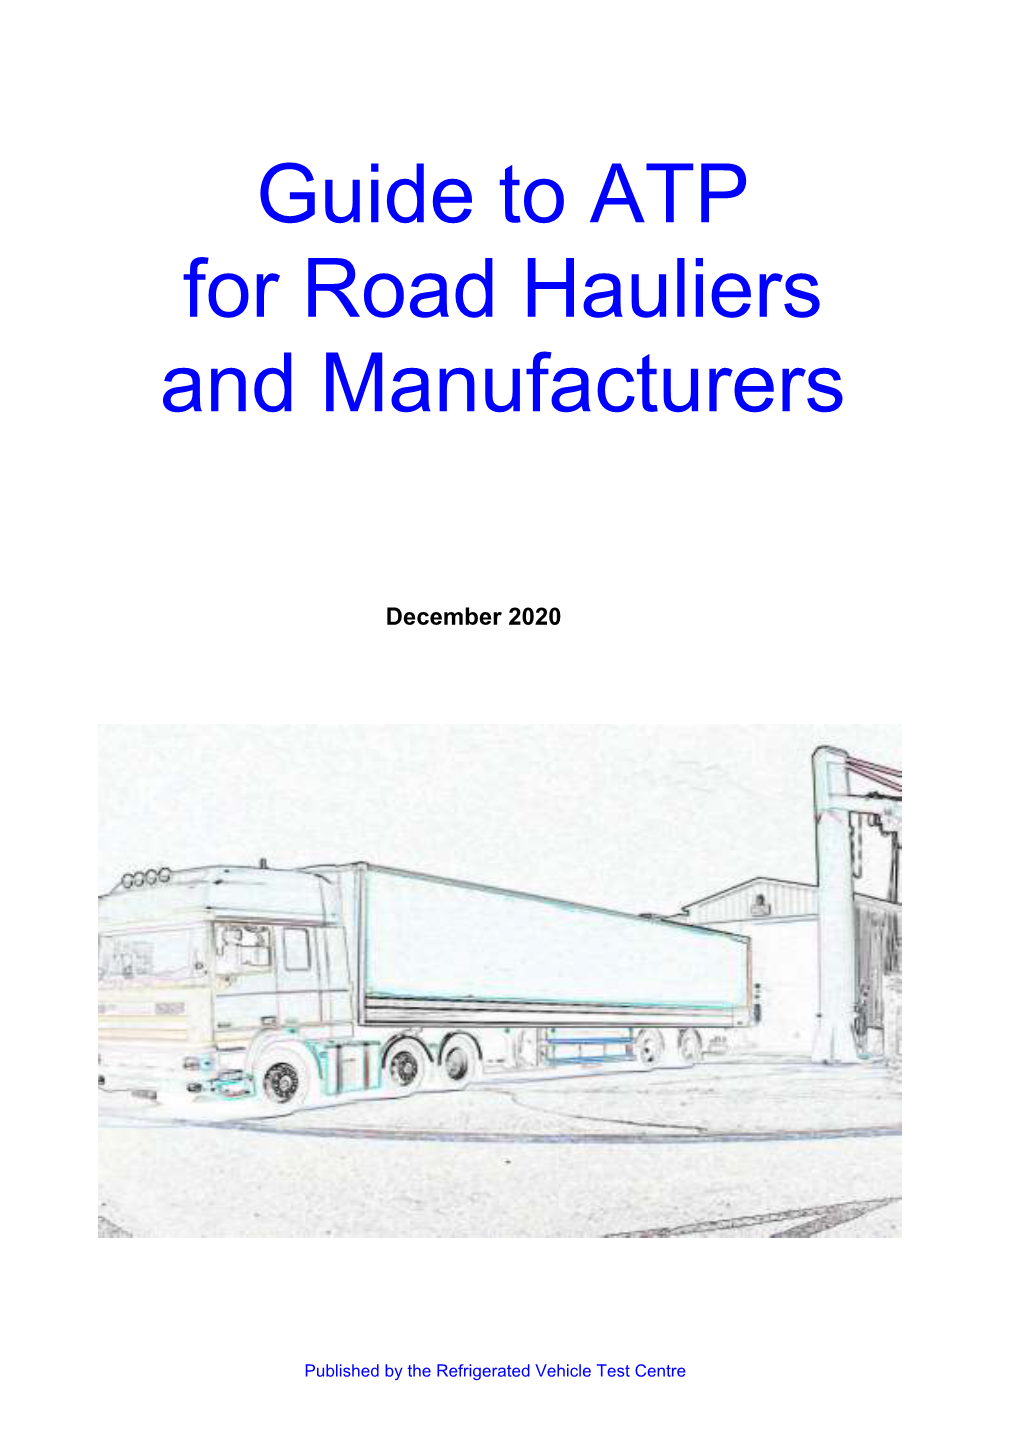 Guide to ATP for Road Hauliers and Manufacturers